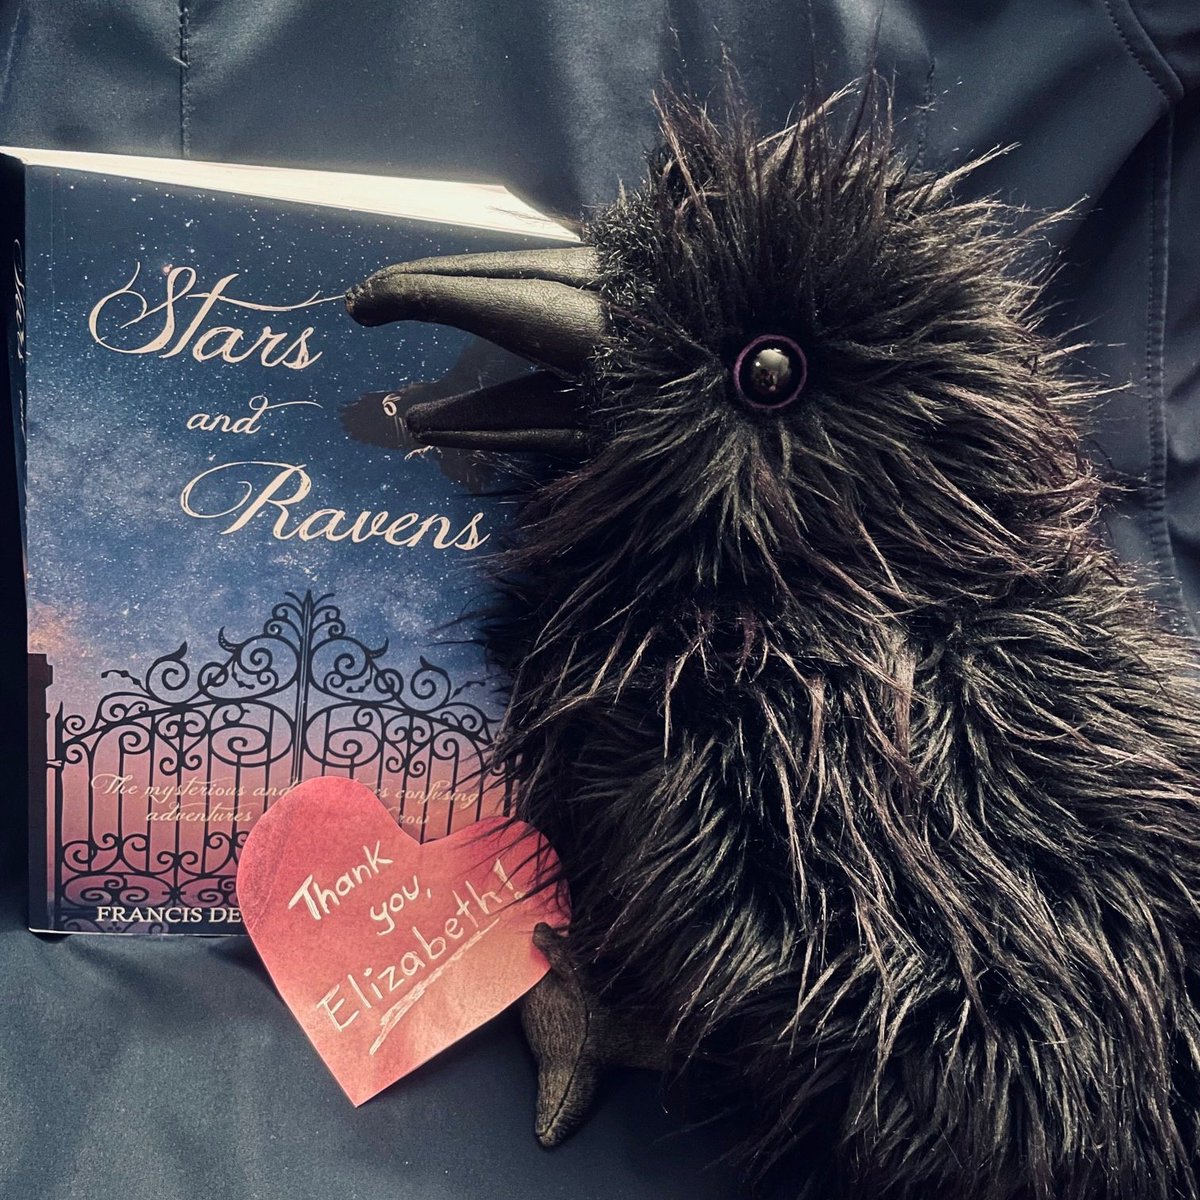 Once more with Fenwick:
Fenwick, @DeerFrancis  and I say thank you for this great and thoughtful review for Stars and Ravens, @illyianoelle and @EPICIND1E. 🥳 This definitely made our day.

#InquisitiveRaven, #SPFBO9, #SPFBO